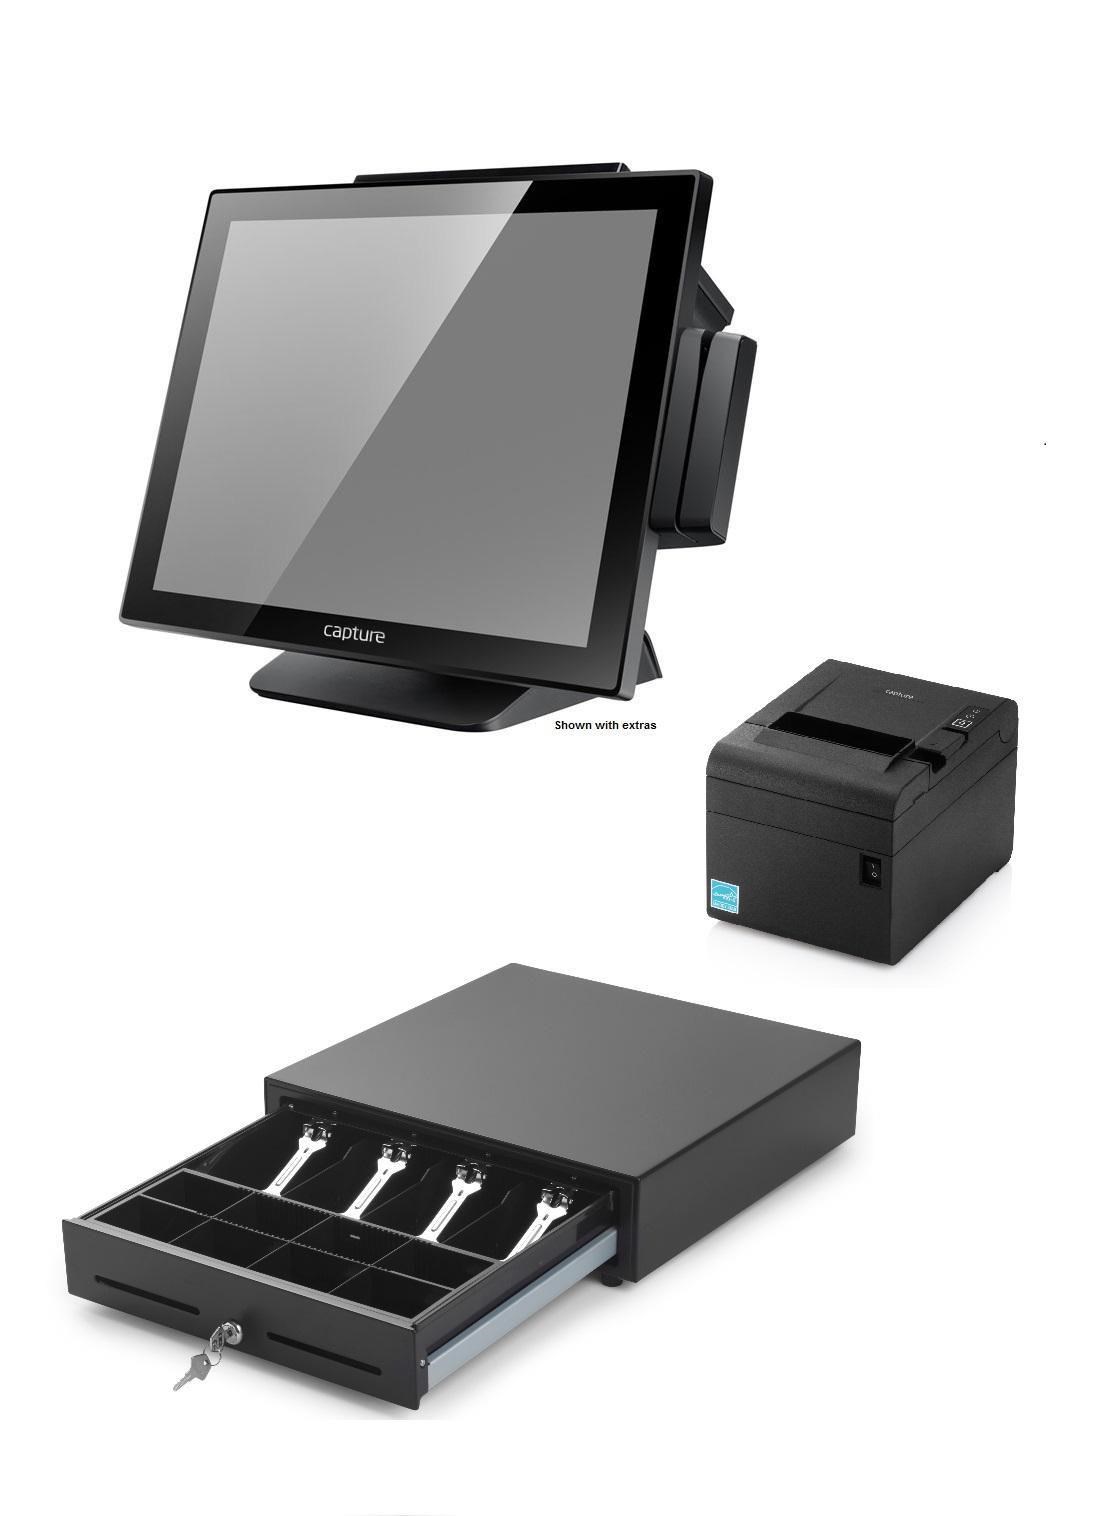 Capture POS In a Box,  Swordfish POS system J1900 + Thermal Printer + 410 mm Cash Drawer (with Windows 10 IoT)0 